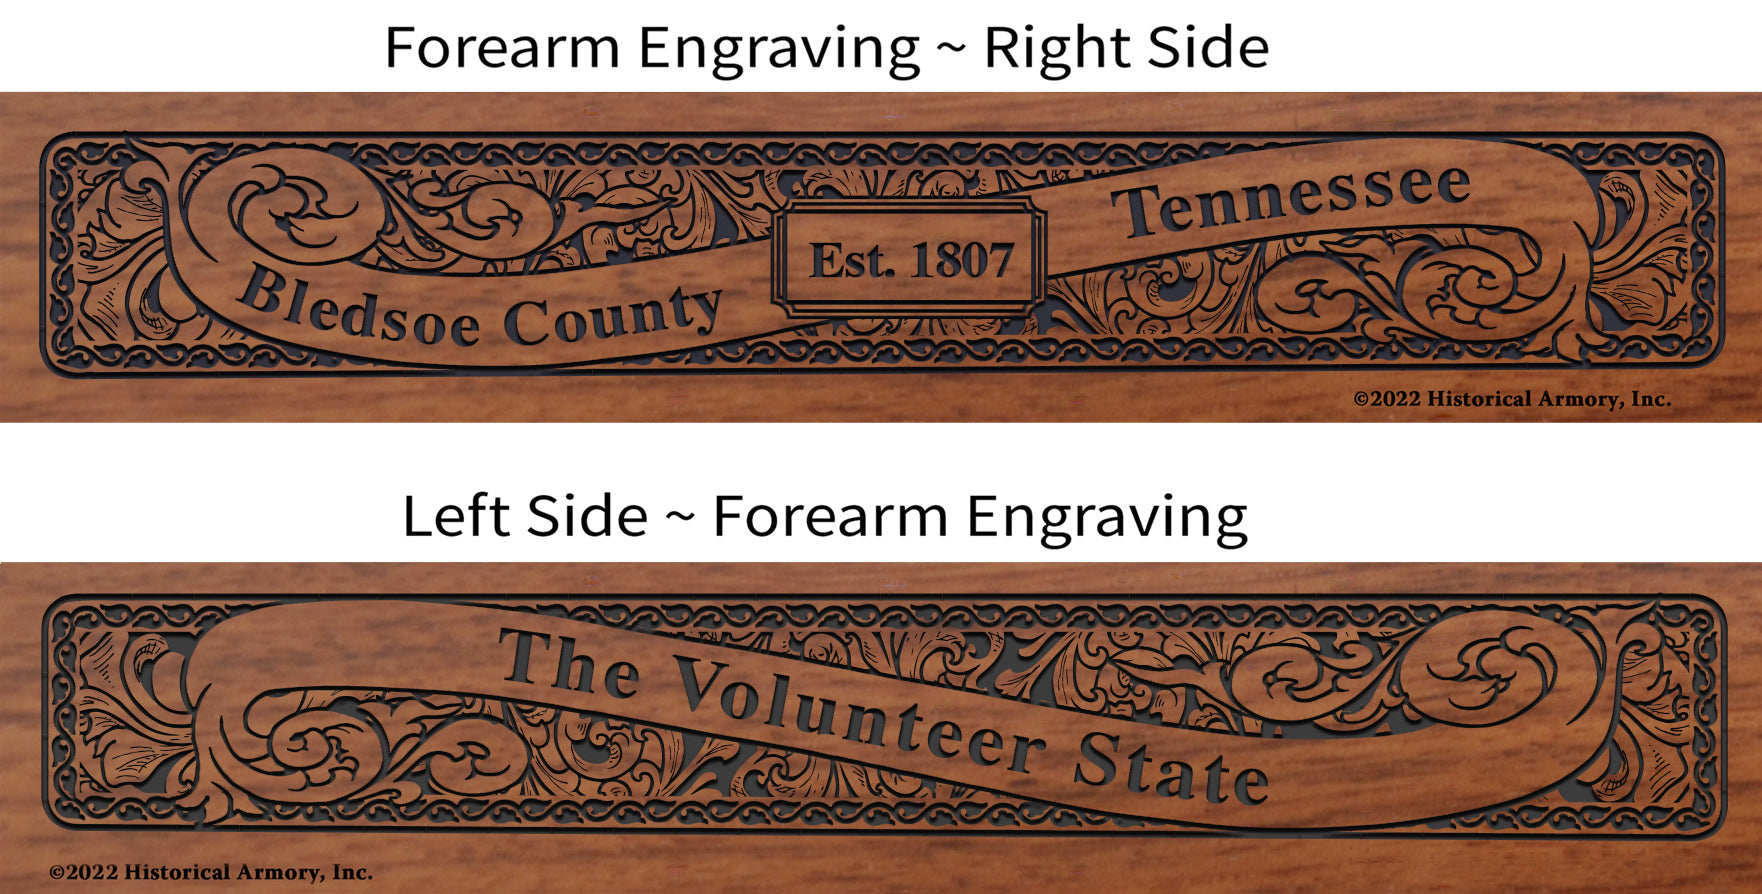 Bledsoe County Tennessee Engraved Rifle Forearm